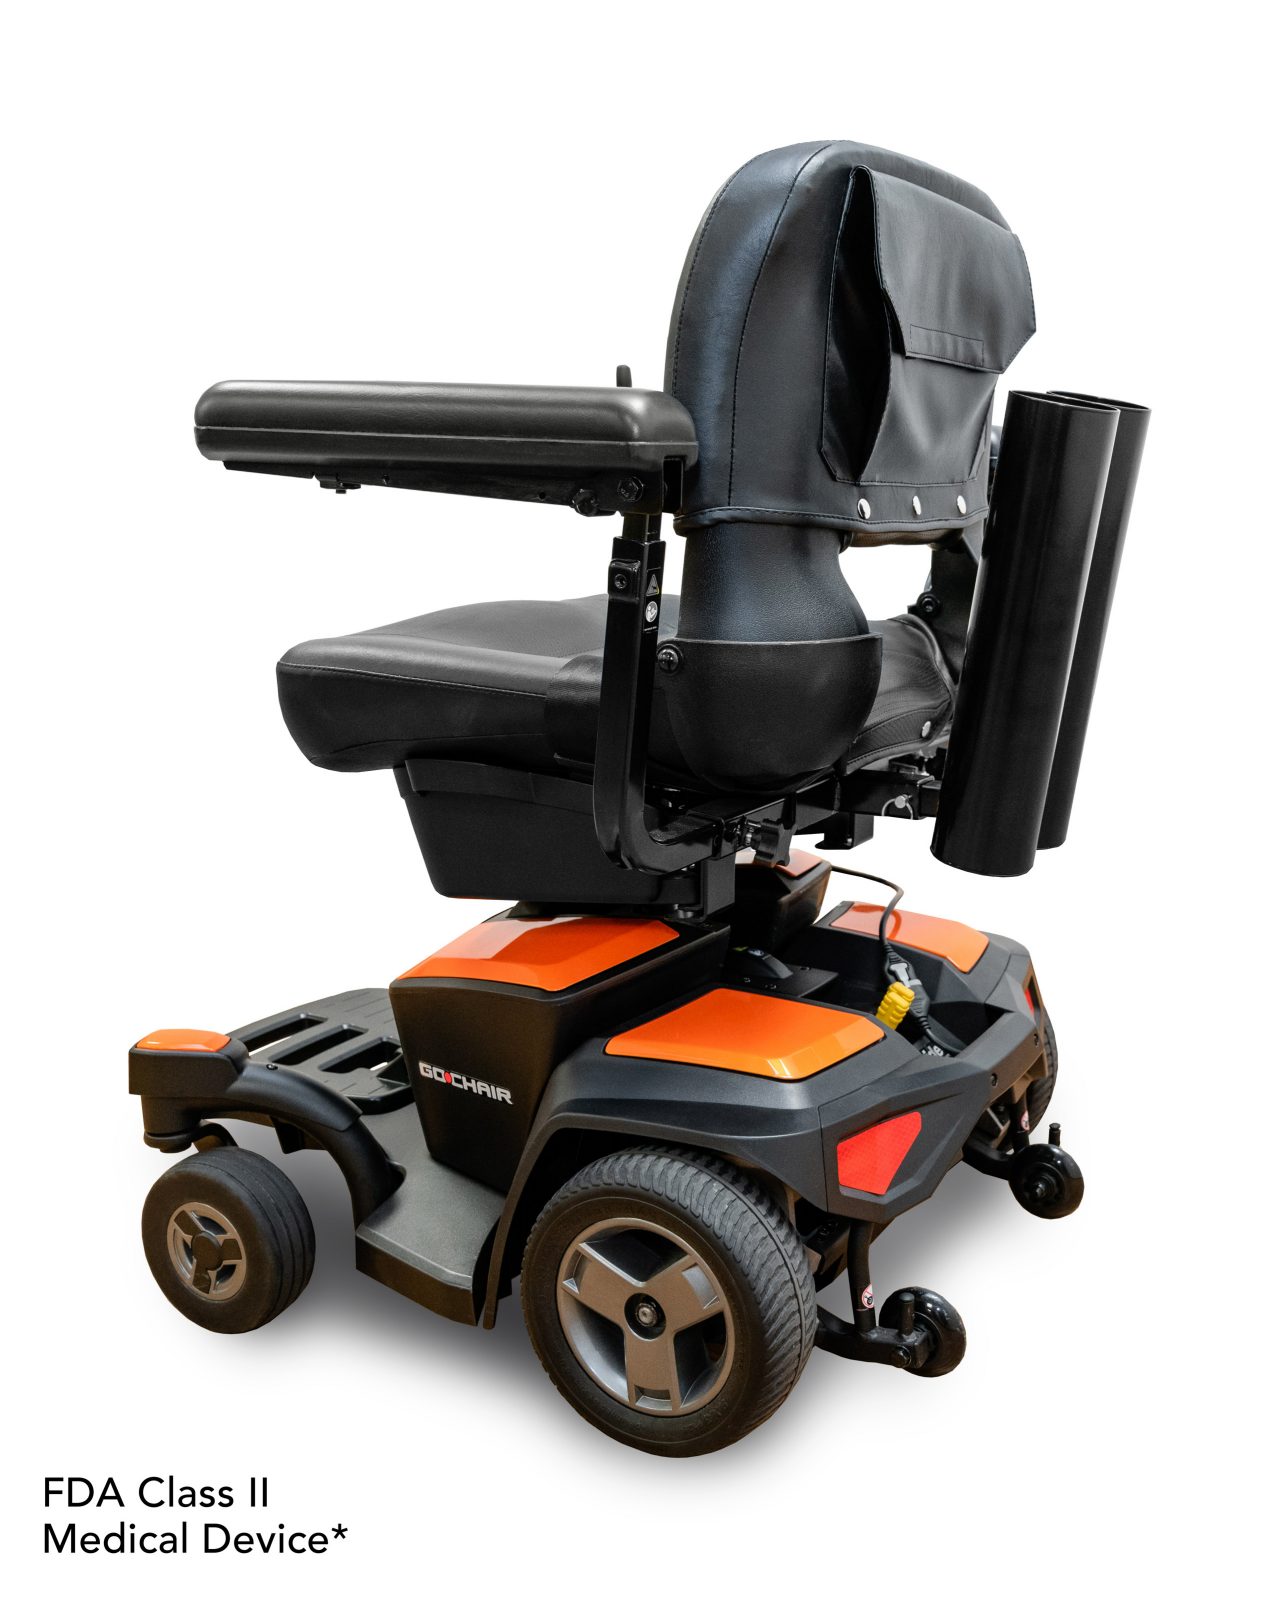 Pride Mobility Go Chair